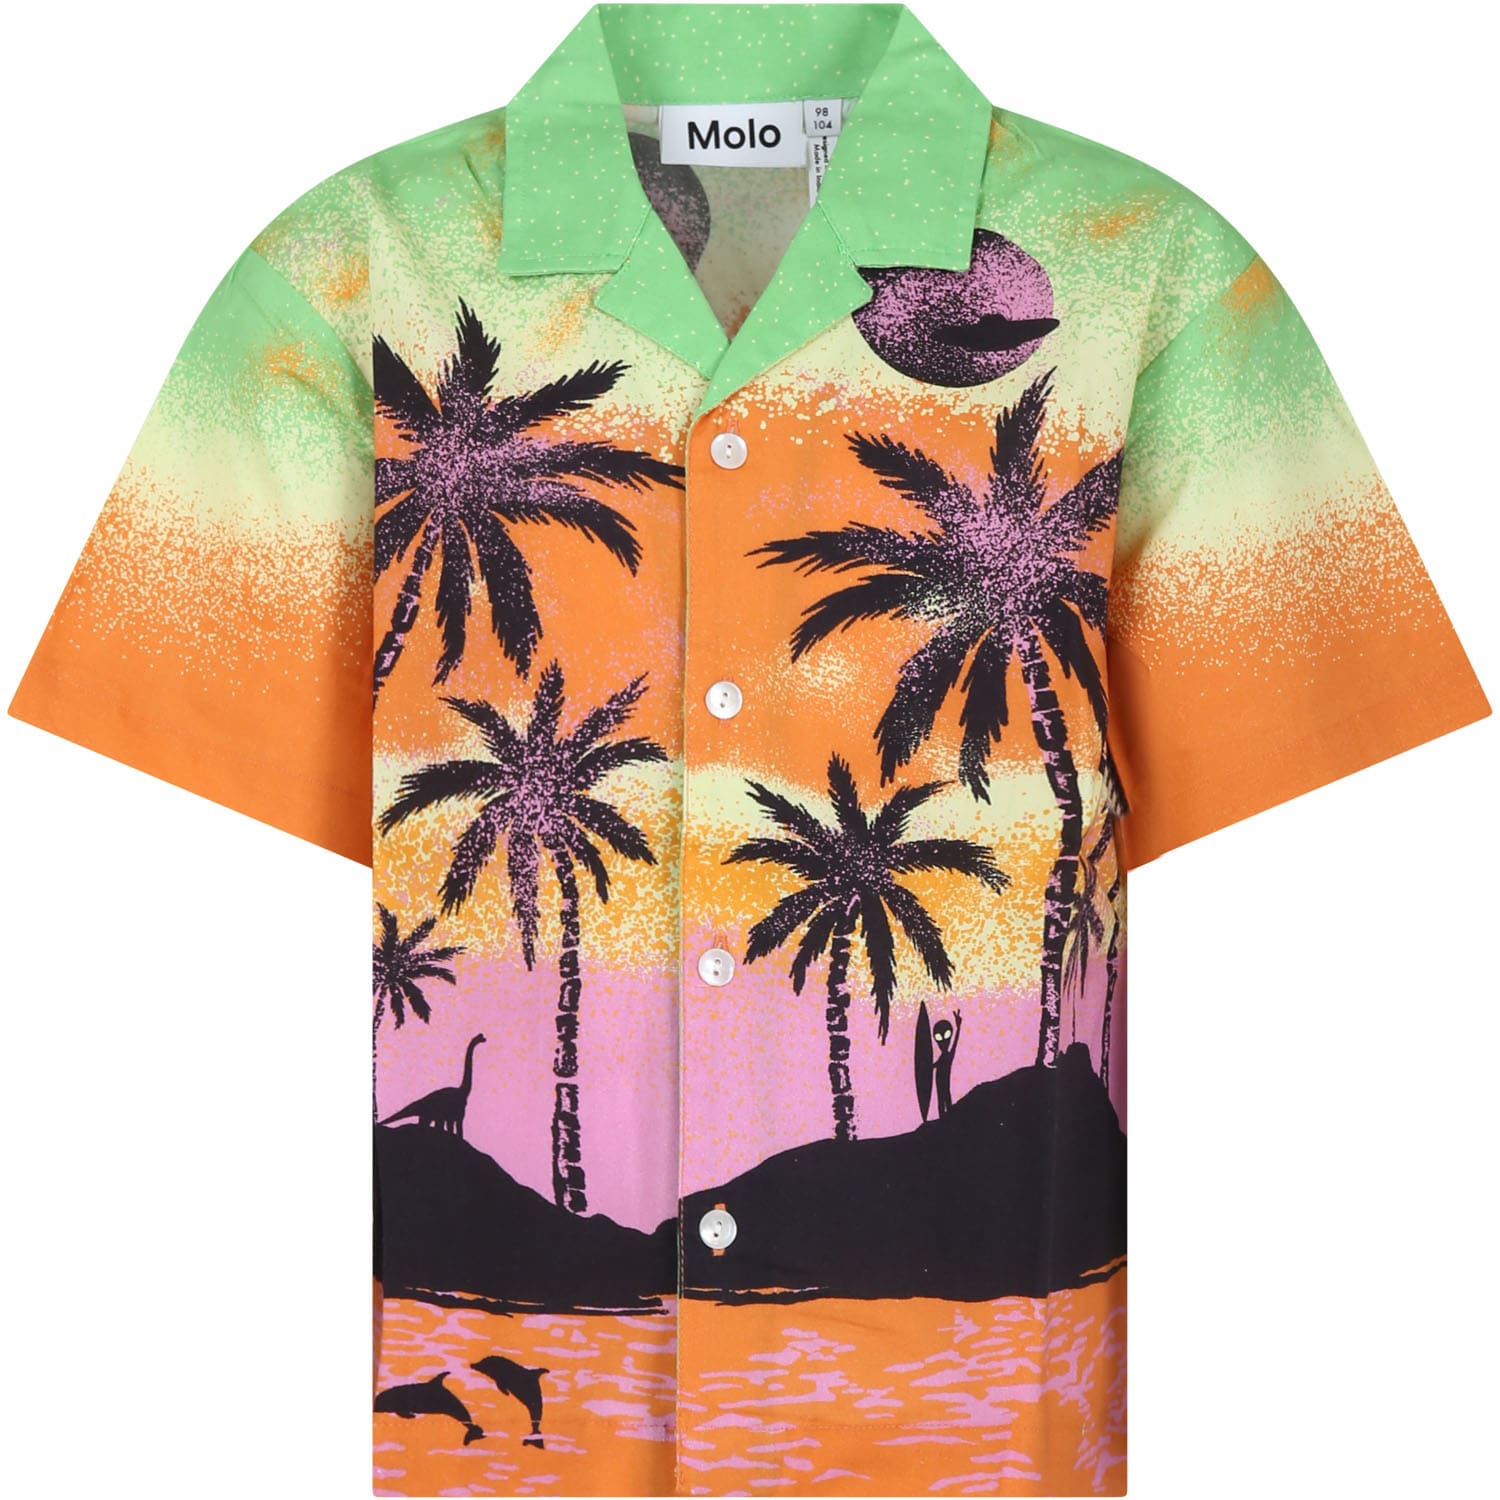 Molo Kids' Orange Shirt For Boy With Alien And Palm Tree Print In Multicolor